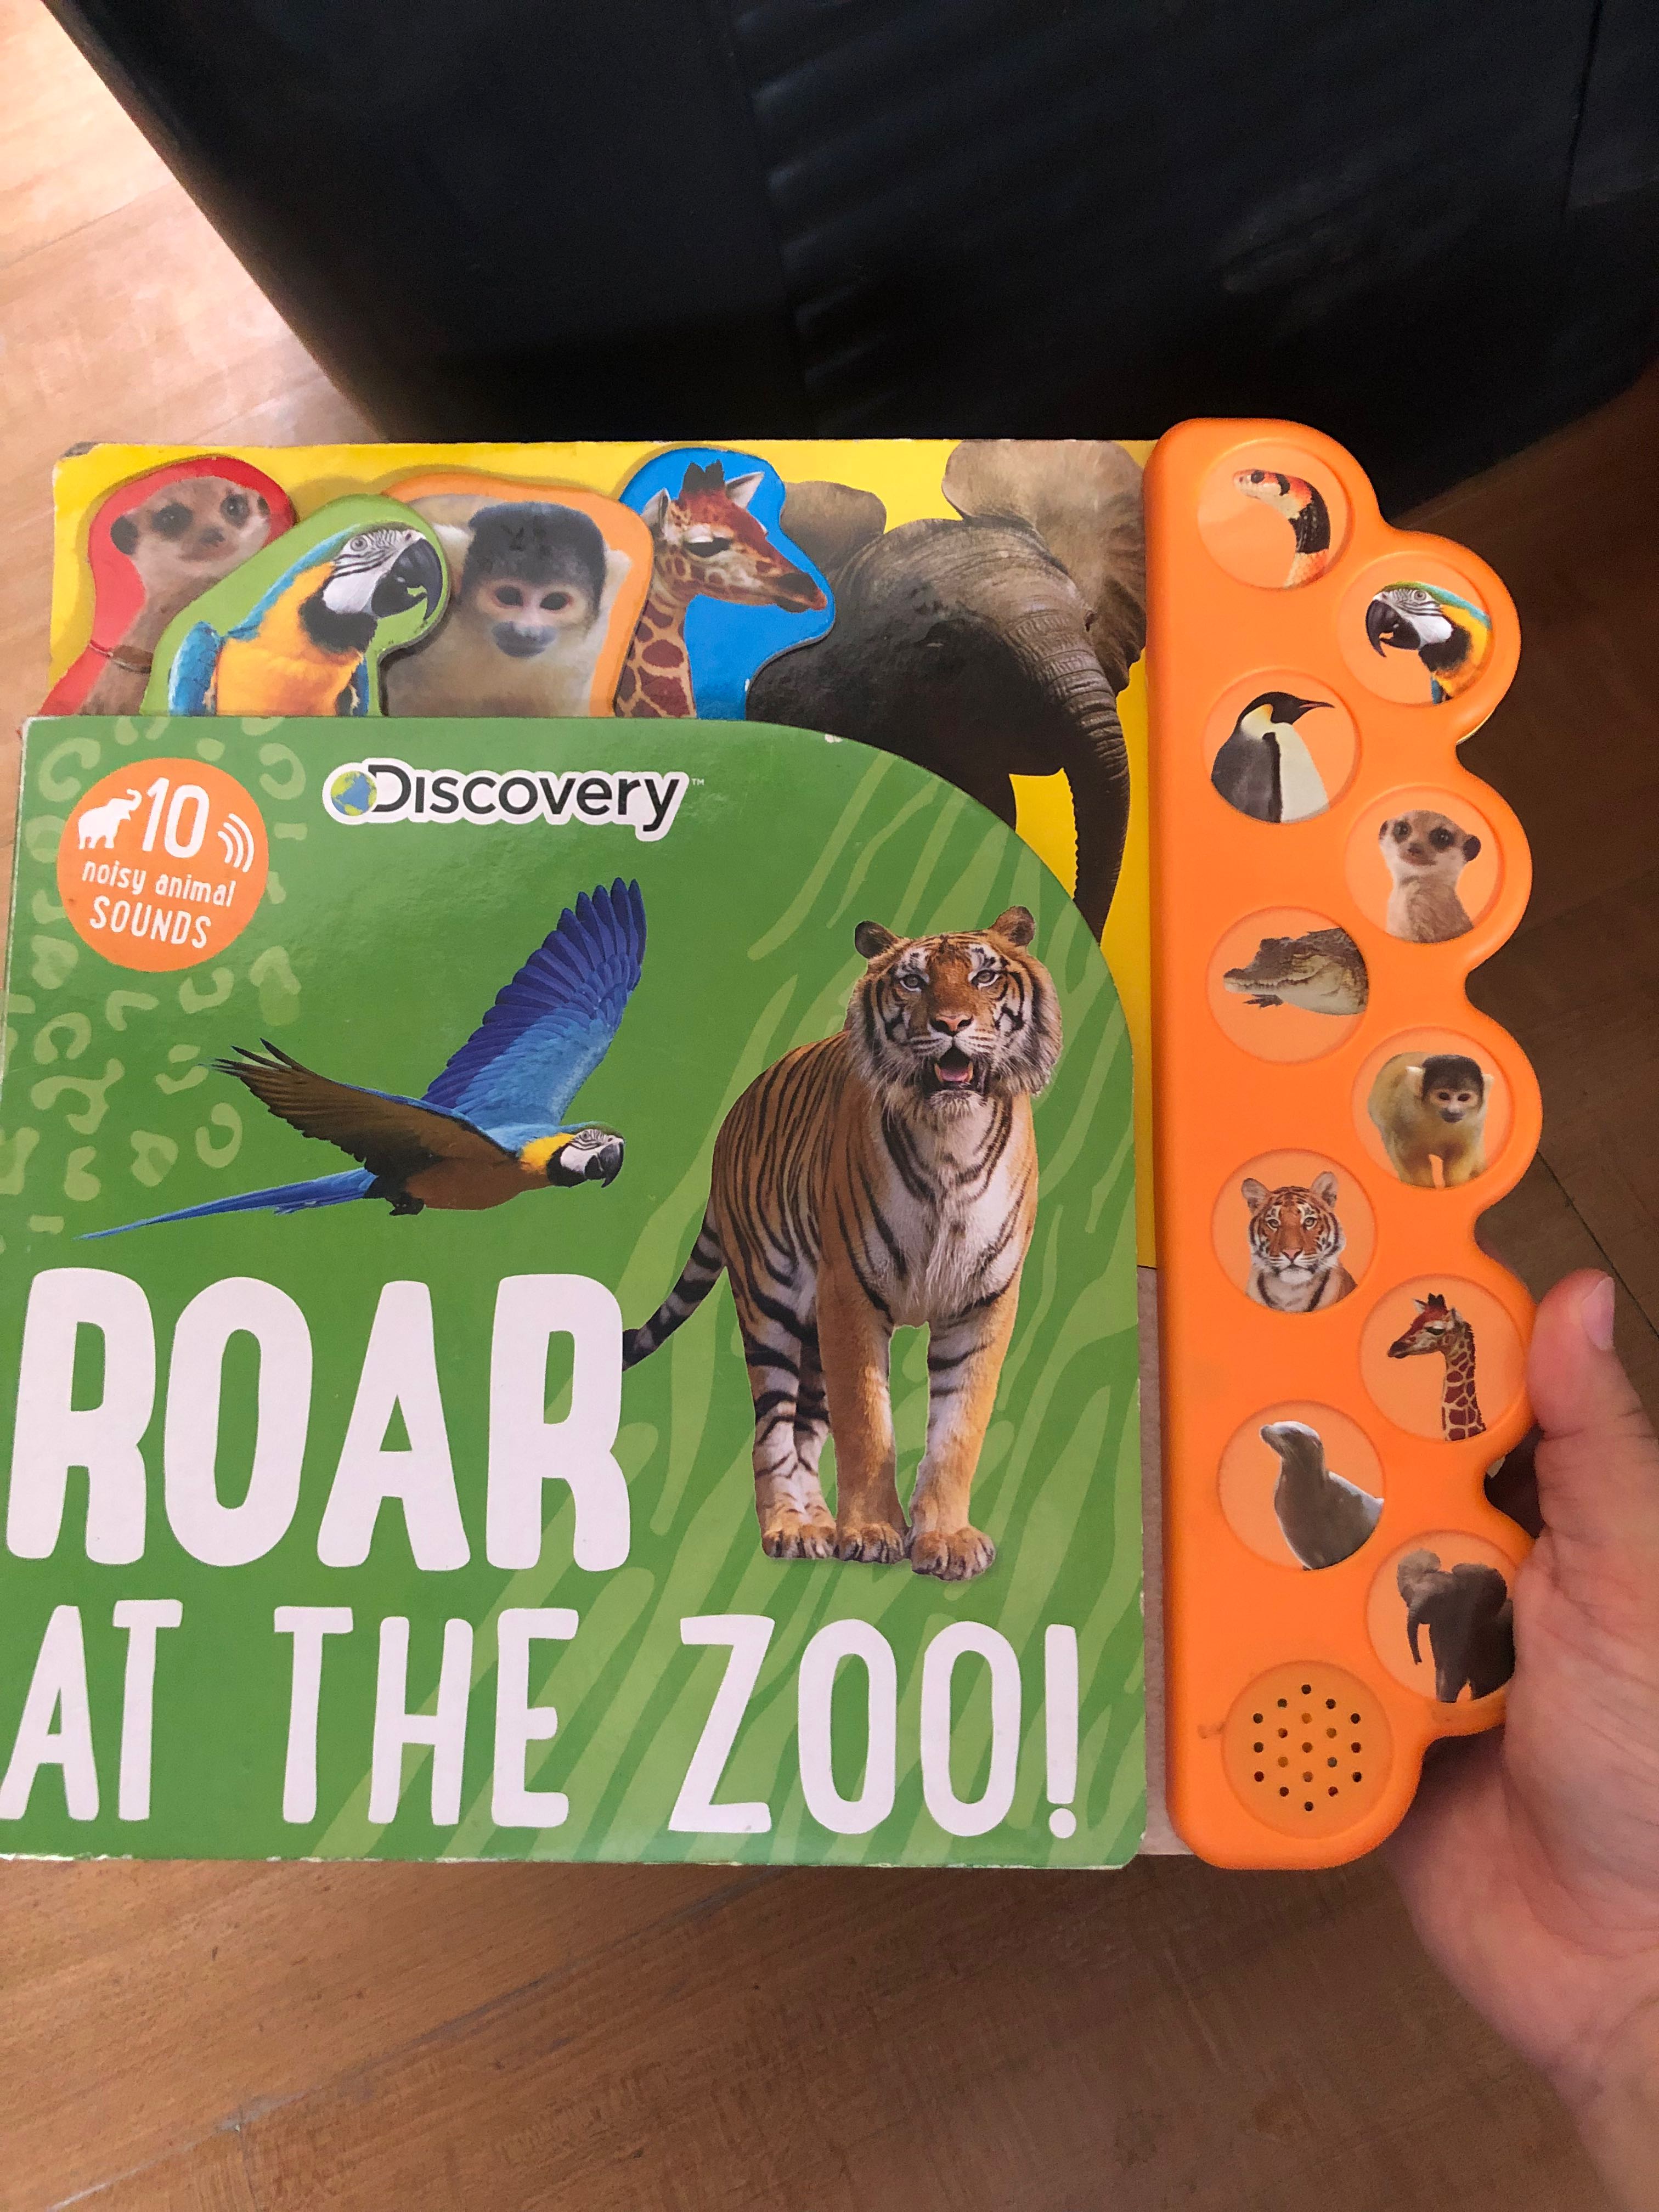 on　Zoo　Toys,　Books　boardbook,　Children's　Roar　Magazines,　Hobbies　Books　Sound　the　at　Discovery　Carousell